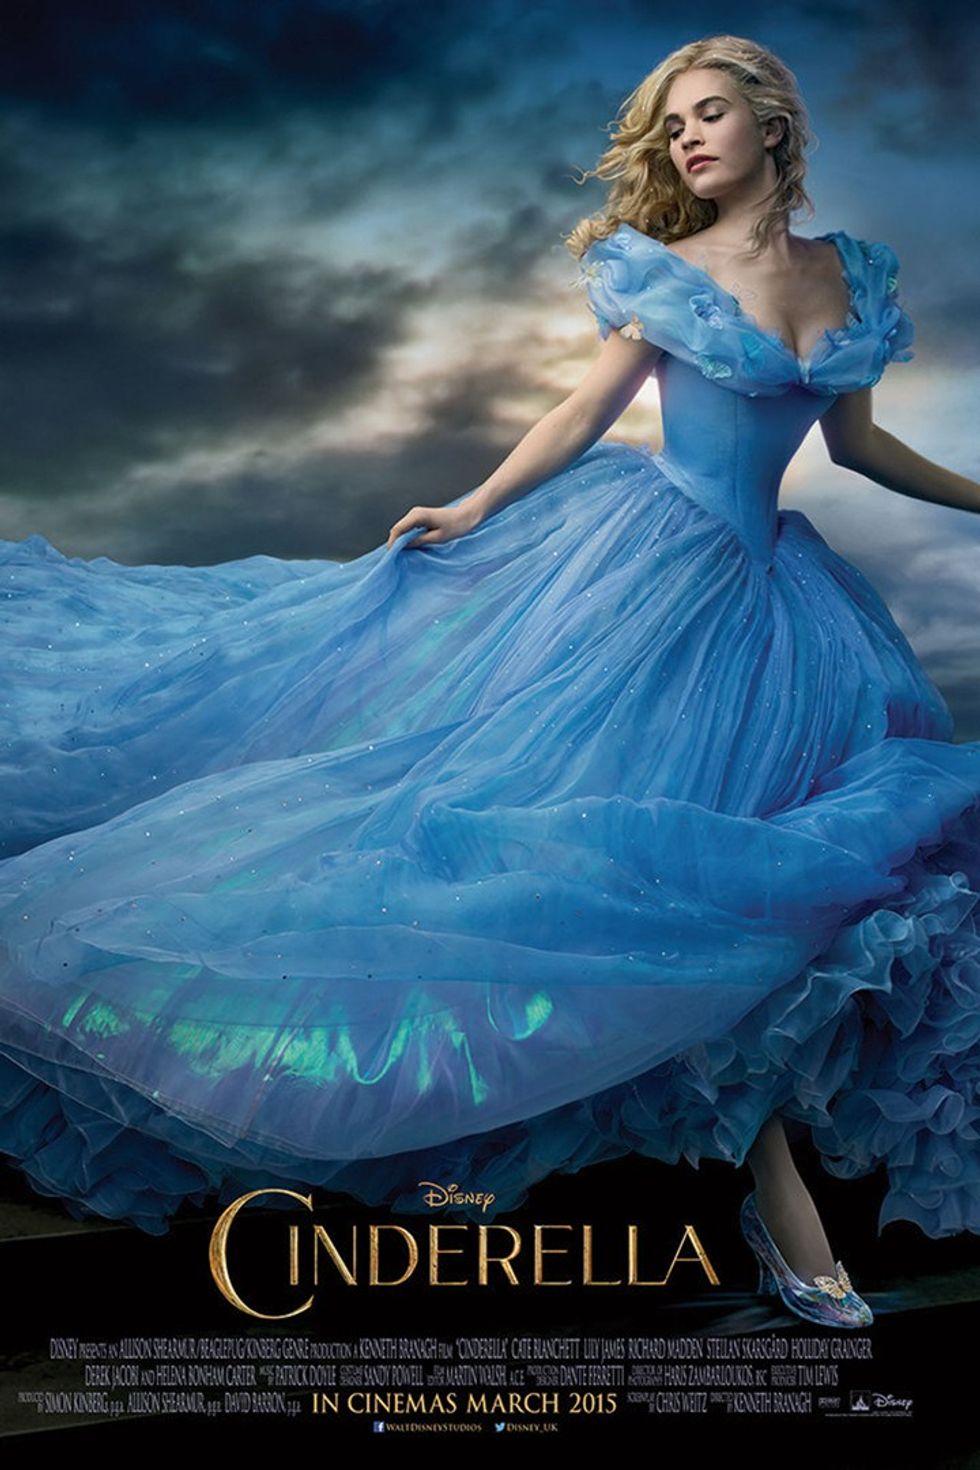 How Disney's 'Cinderella' Provides the Key to Happiness